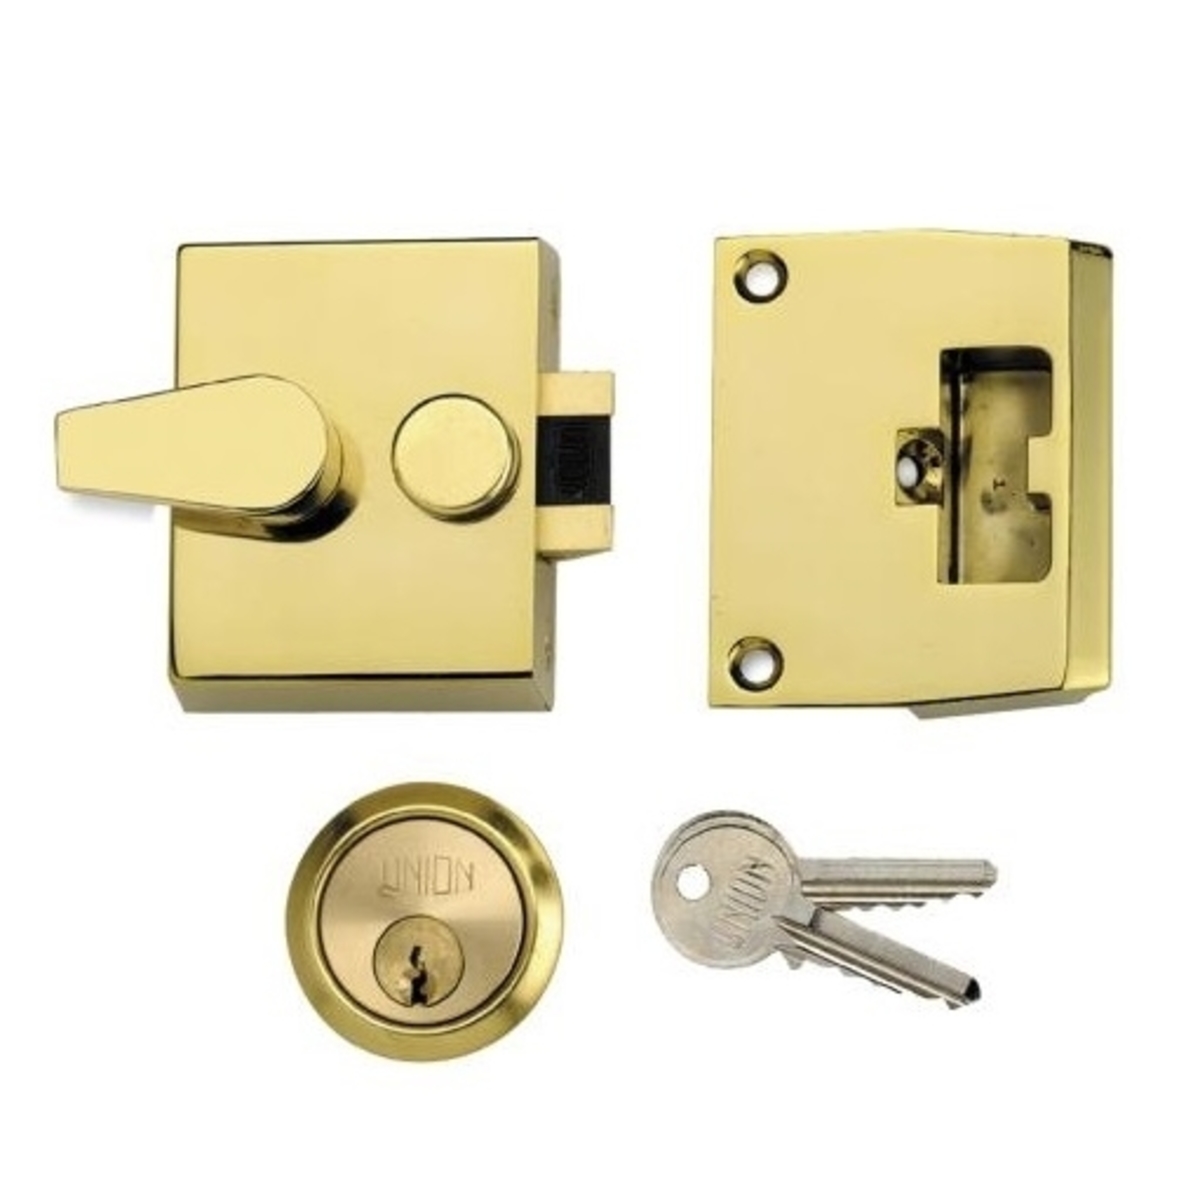 Union 1037/L1037 Narrow Stile Cylinder Night Latch Suppliers Dealers